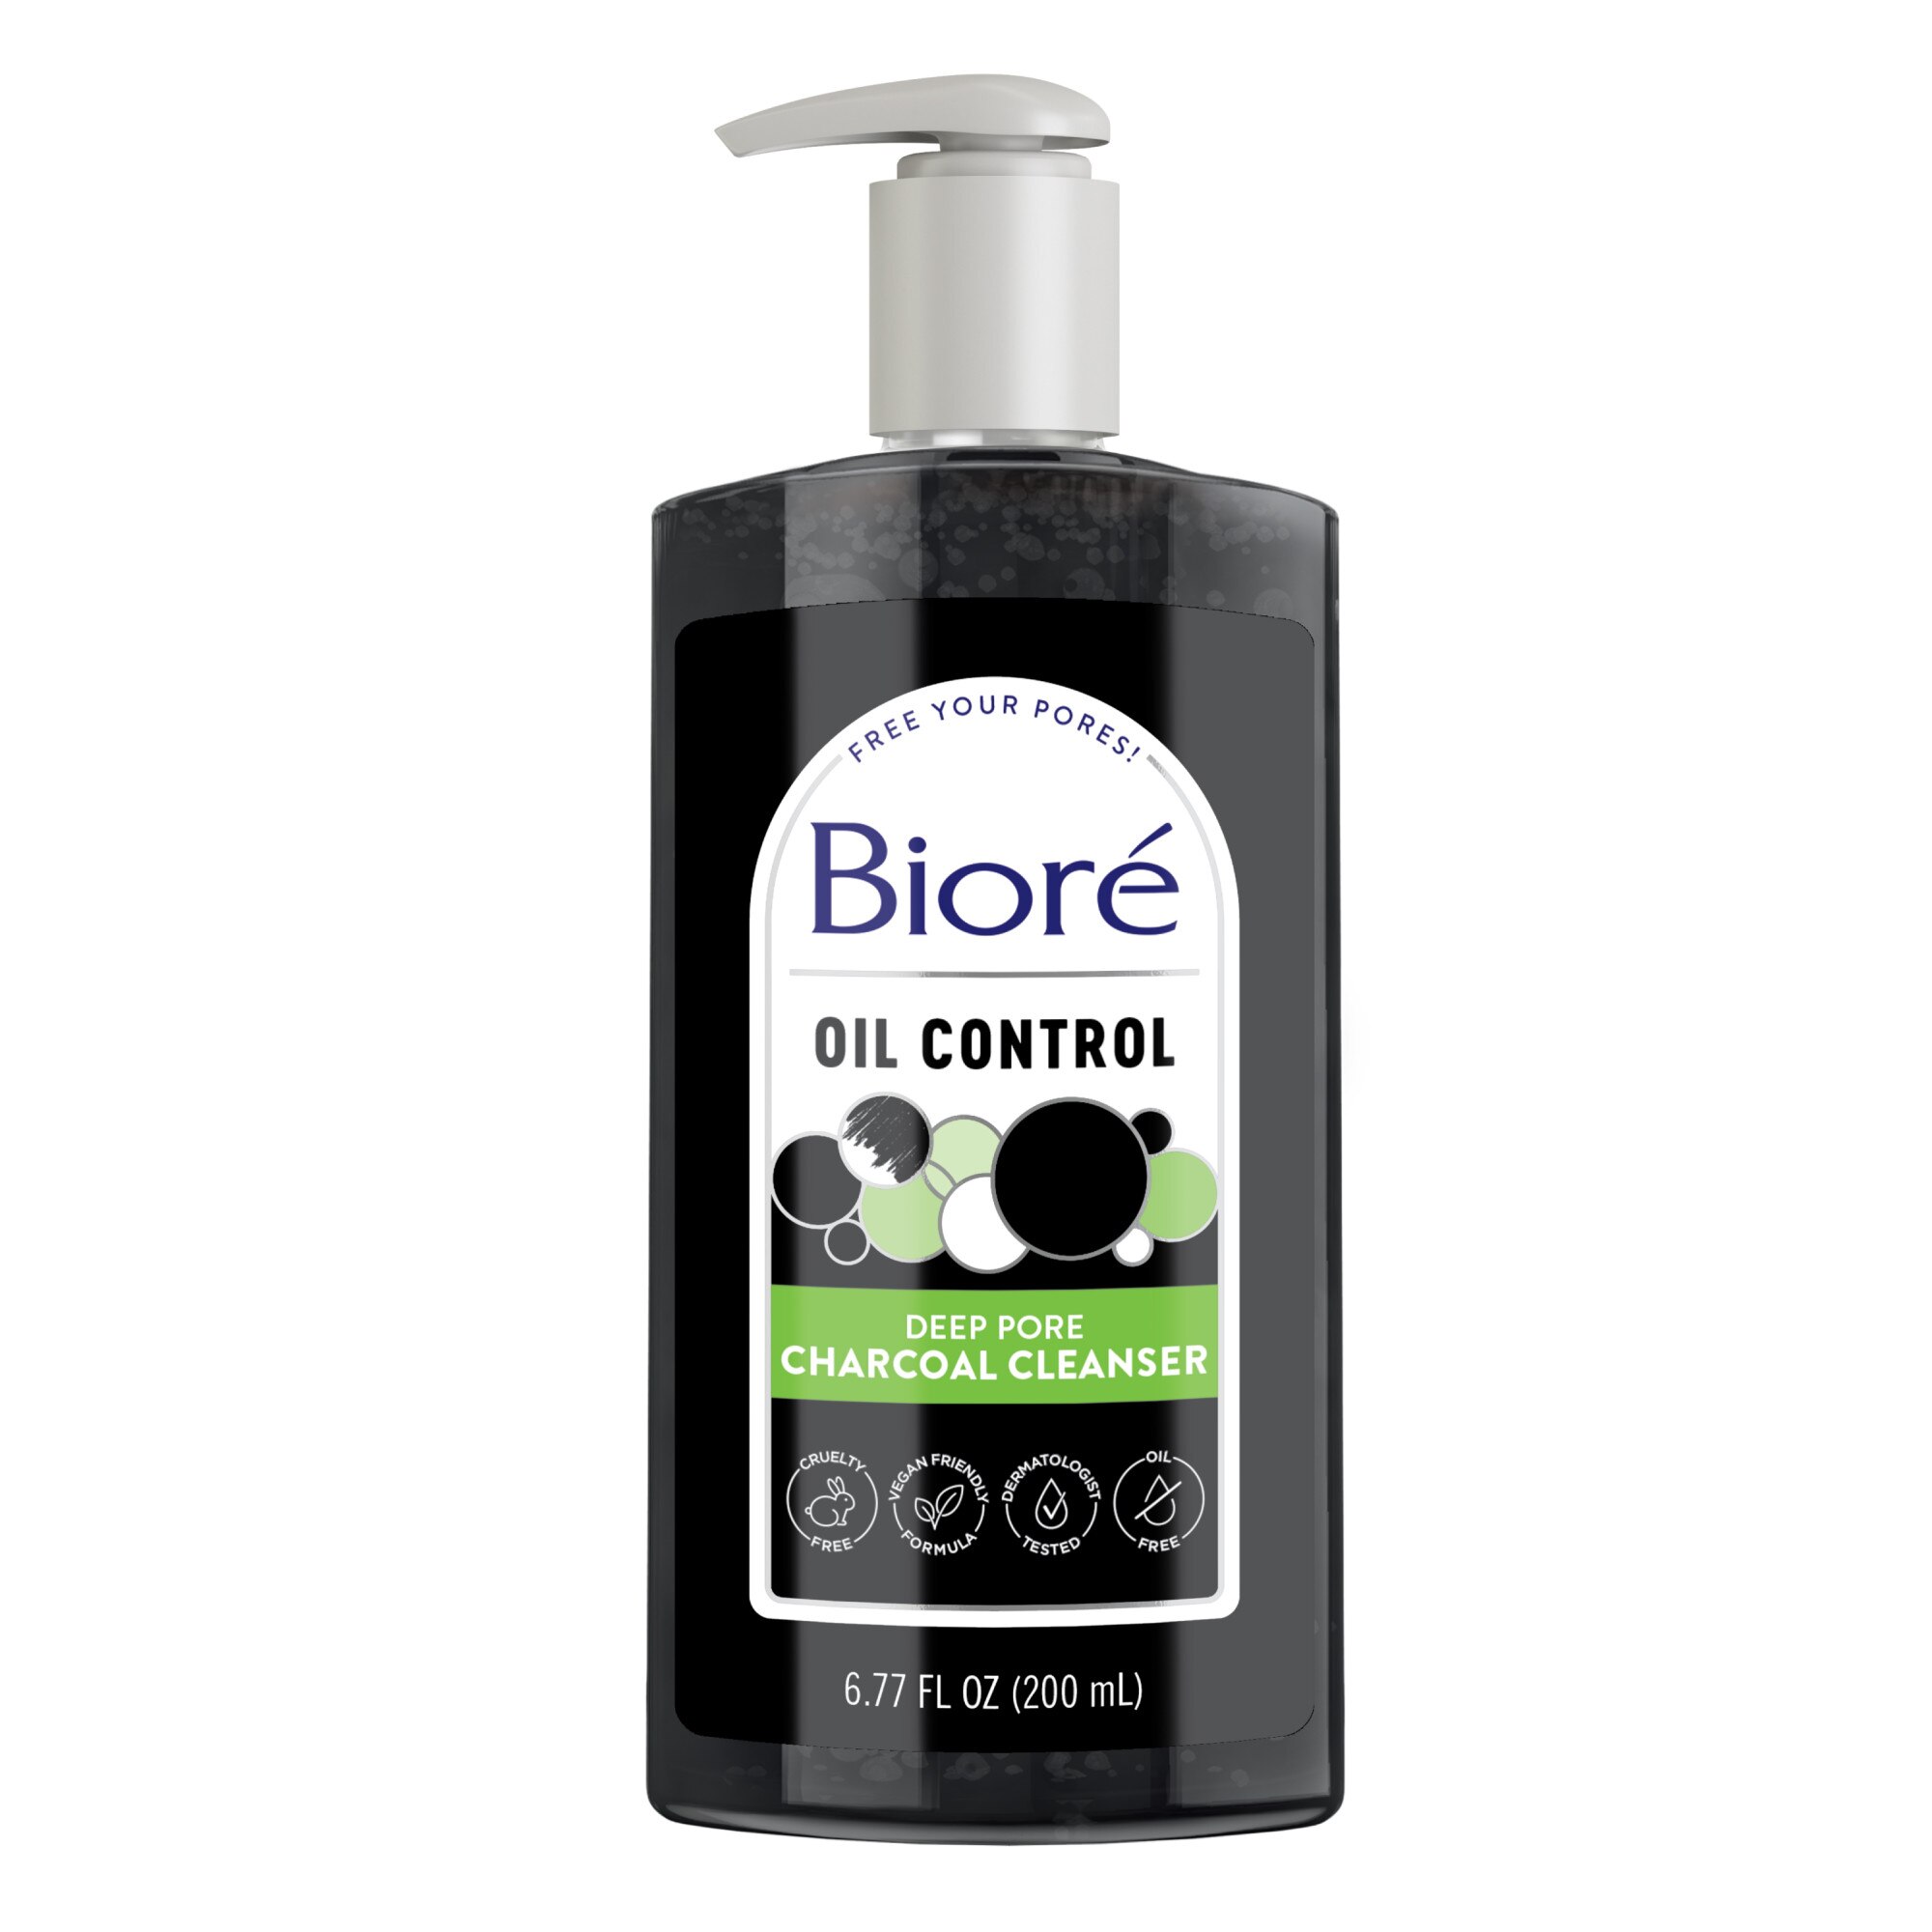 Biore Deep Pore Charcoal Cleanser for Dirt and Makeup Removal From Oily Skin, 6.77 OZ